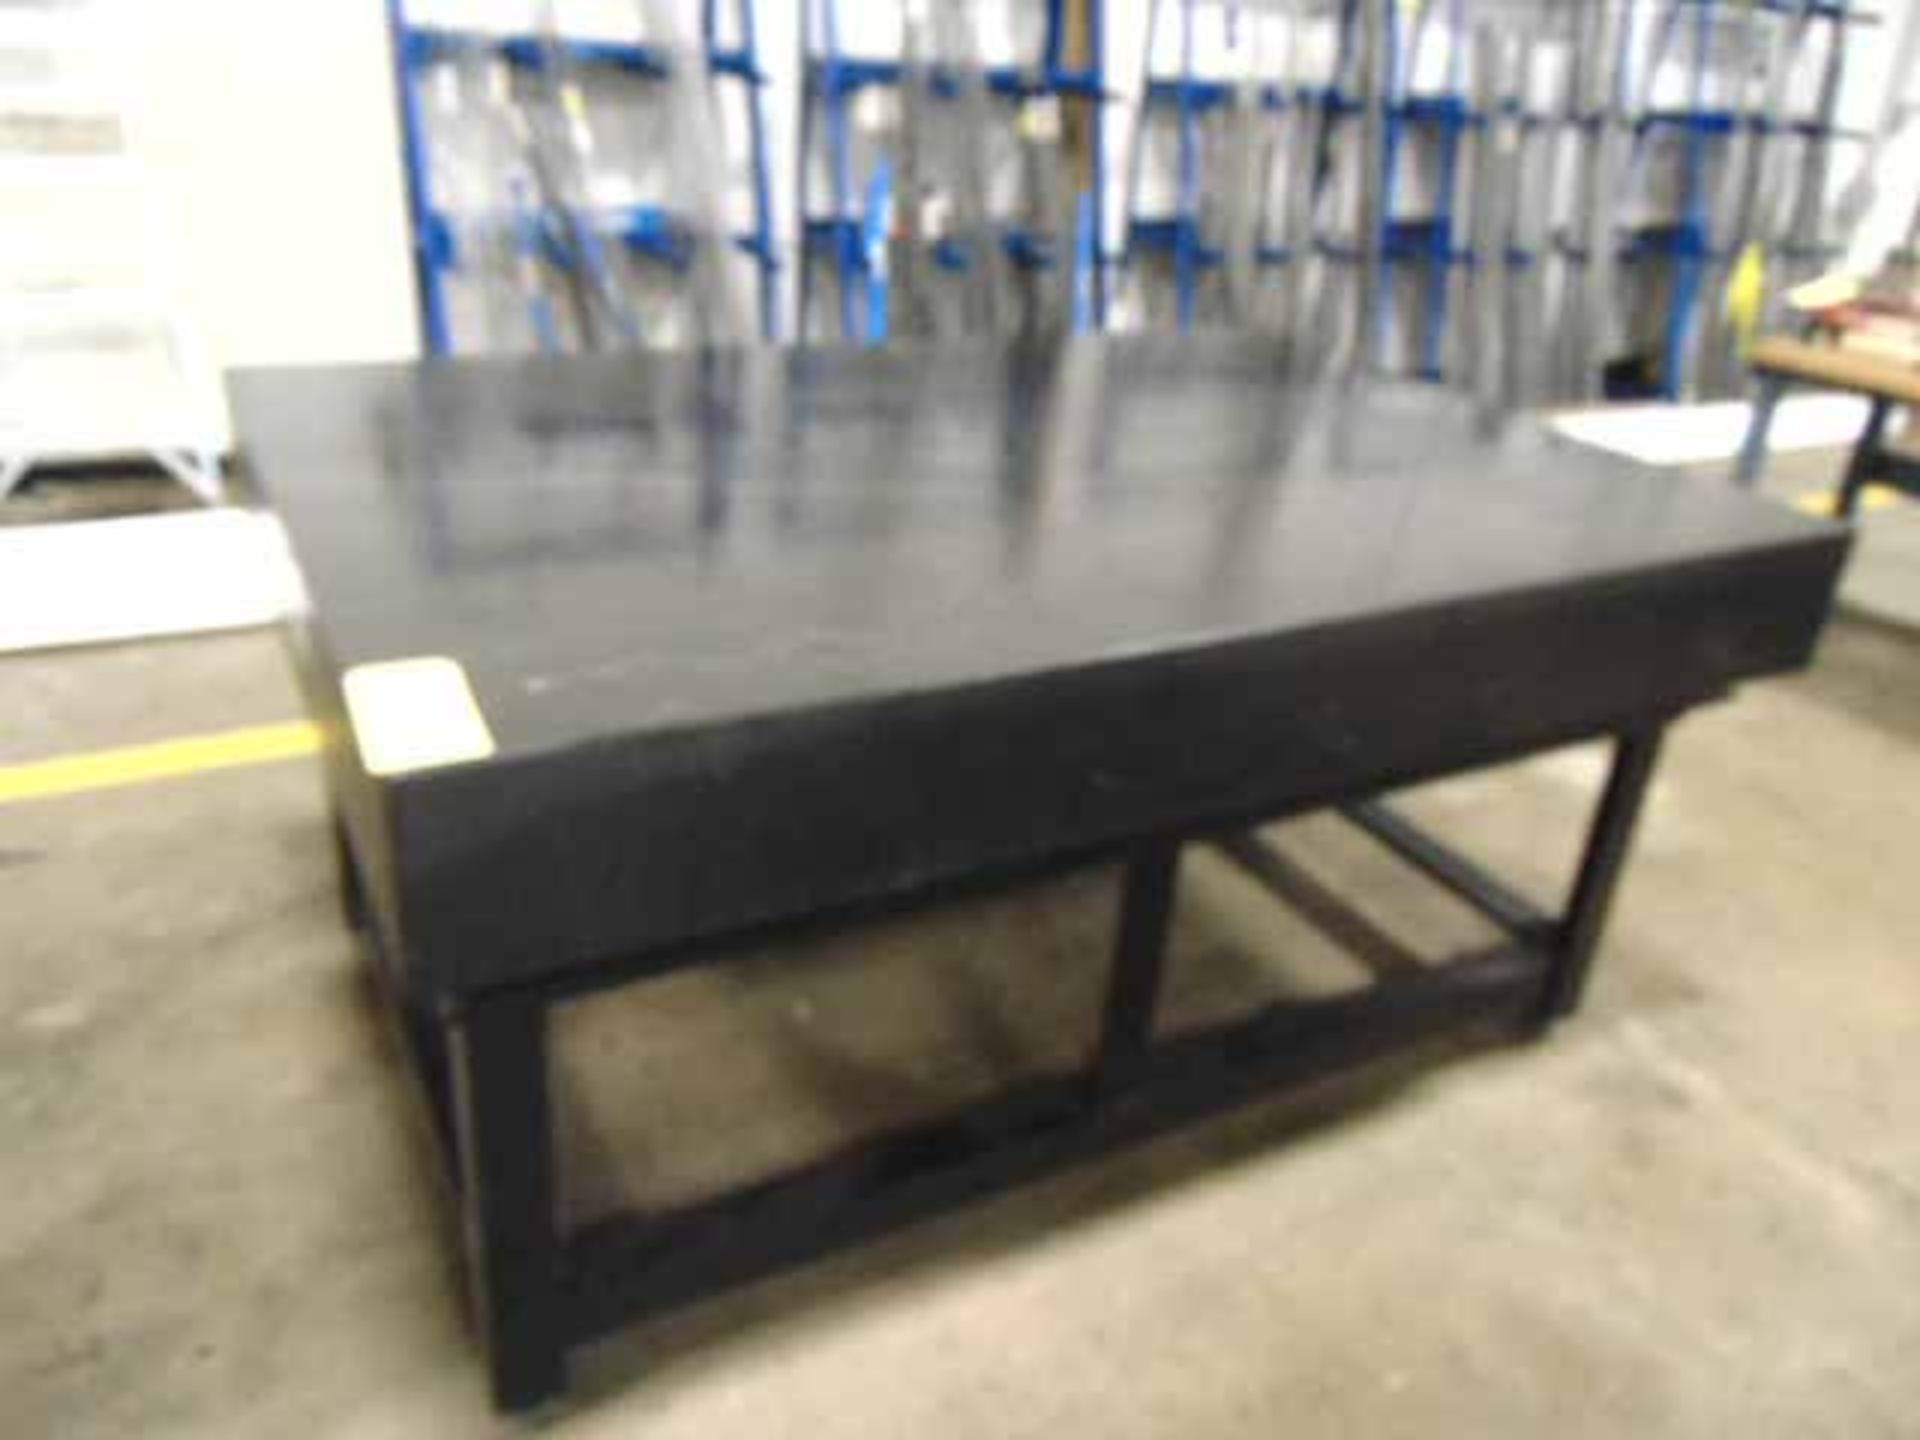 GRANITE SURFACE PLATE, 48” x 72” x 8” thk., Grade A, on fabricated steel stand